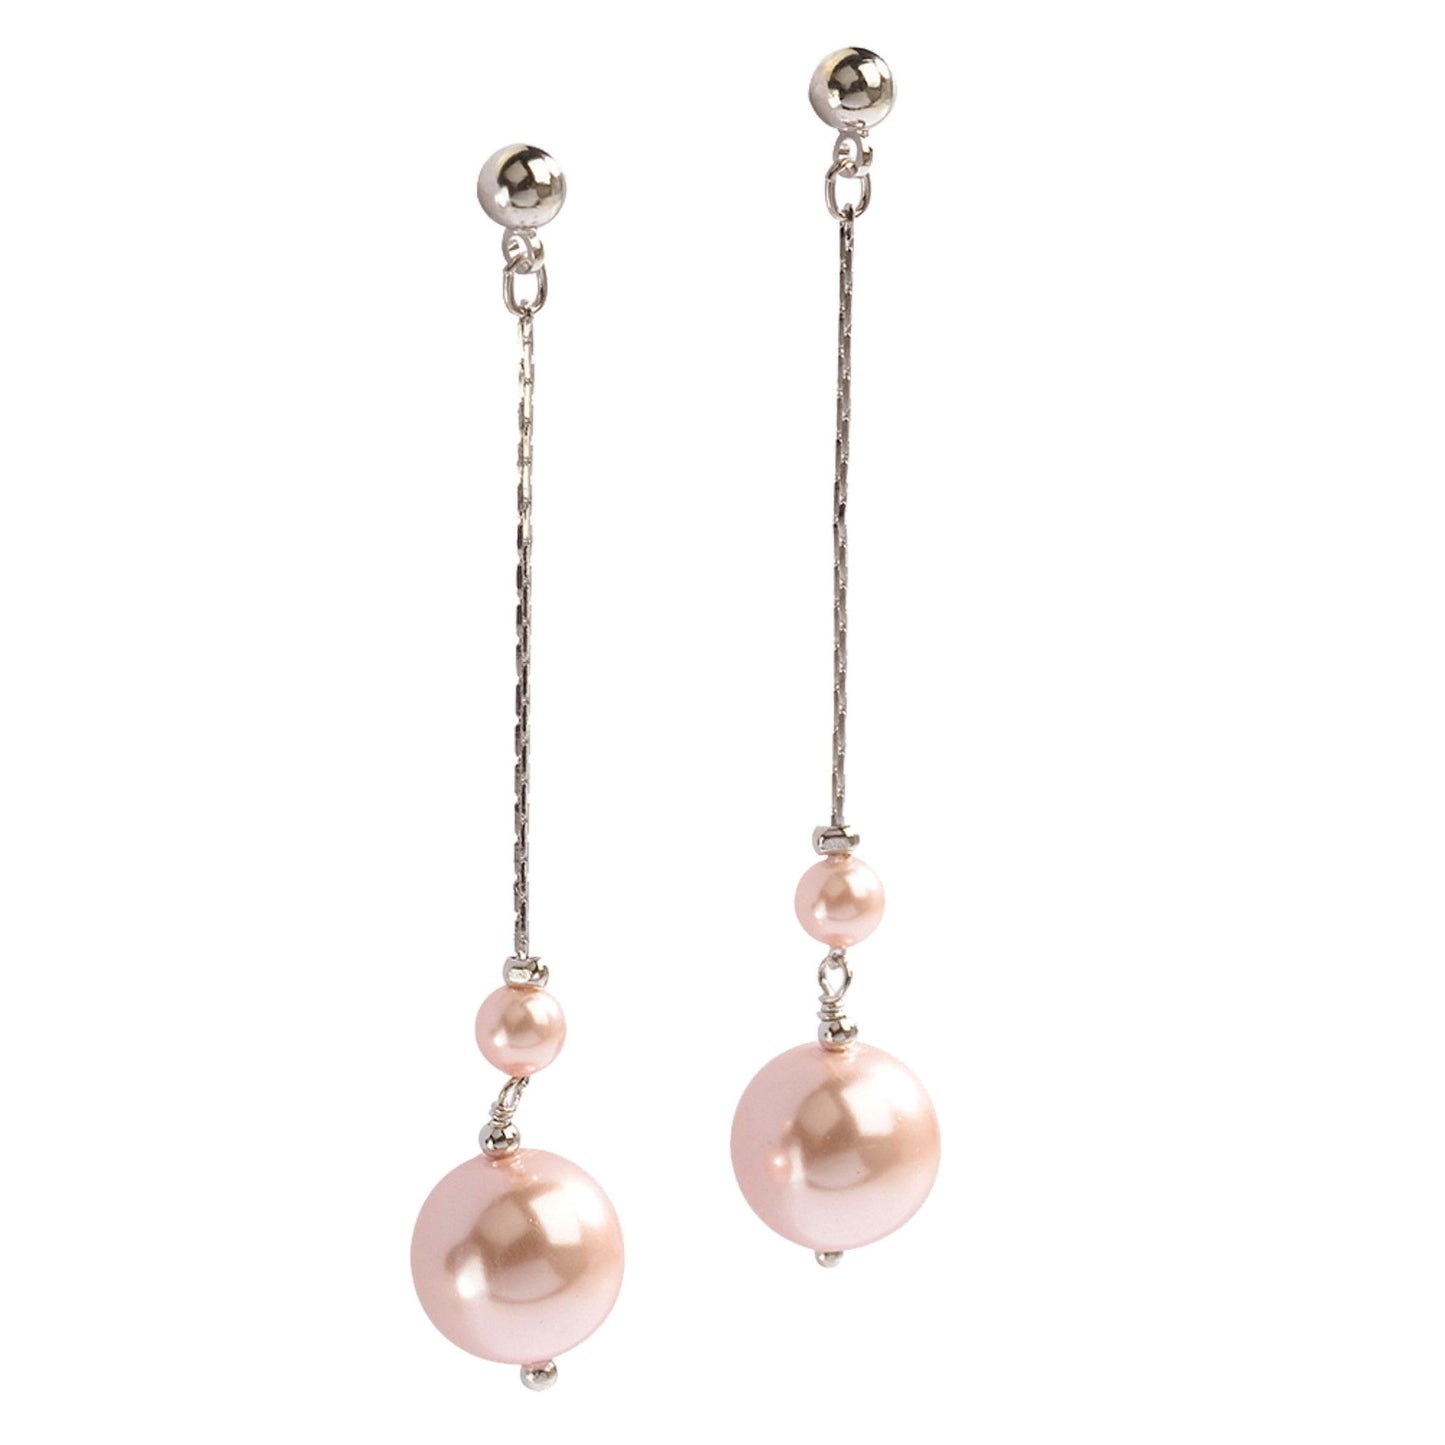 A pink glass pearl drop earrings displayed on a neutral white background.